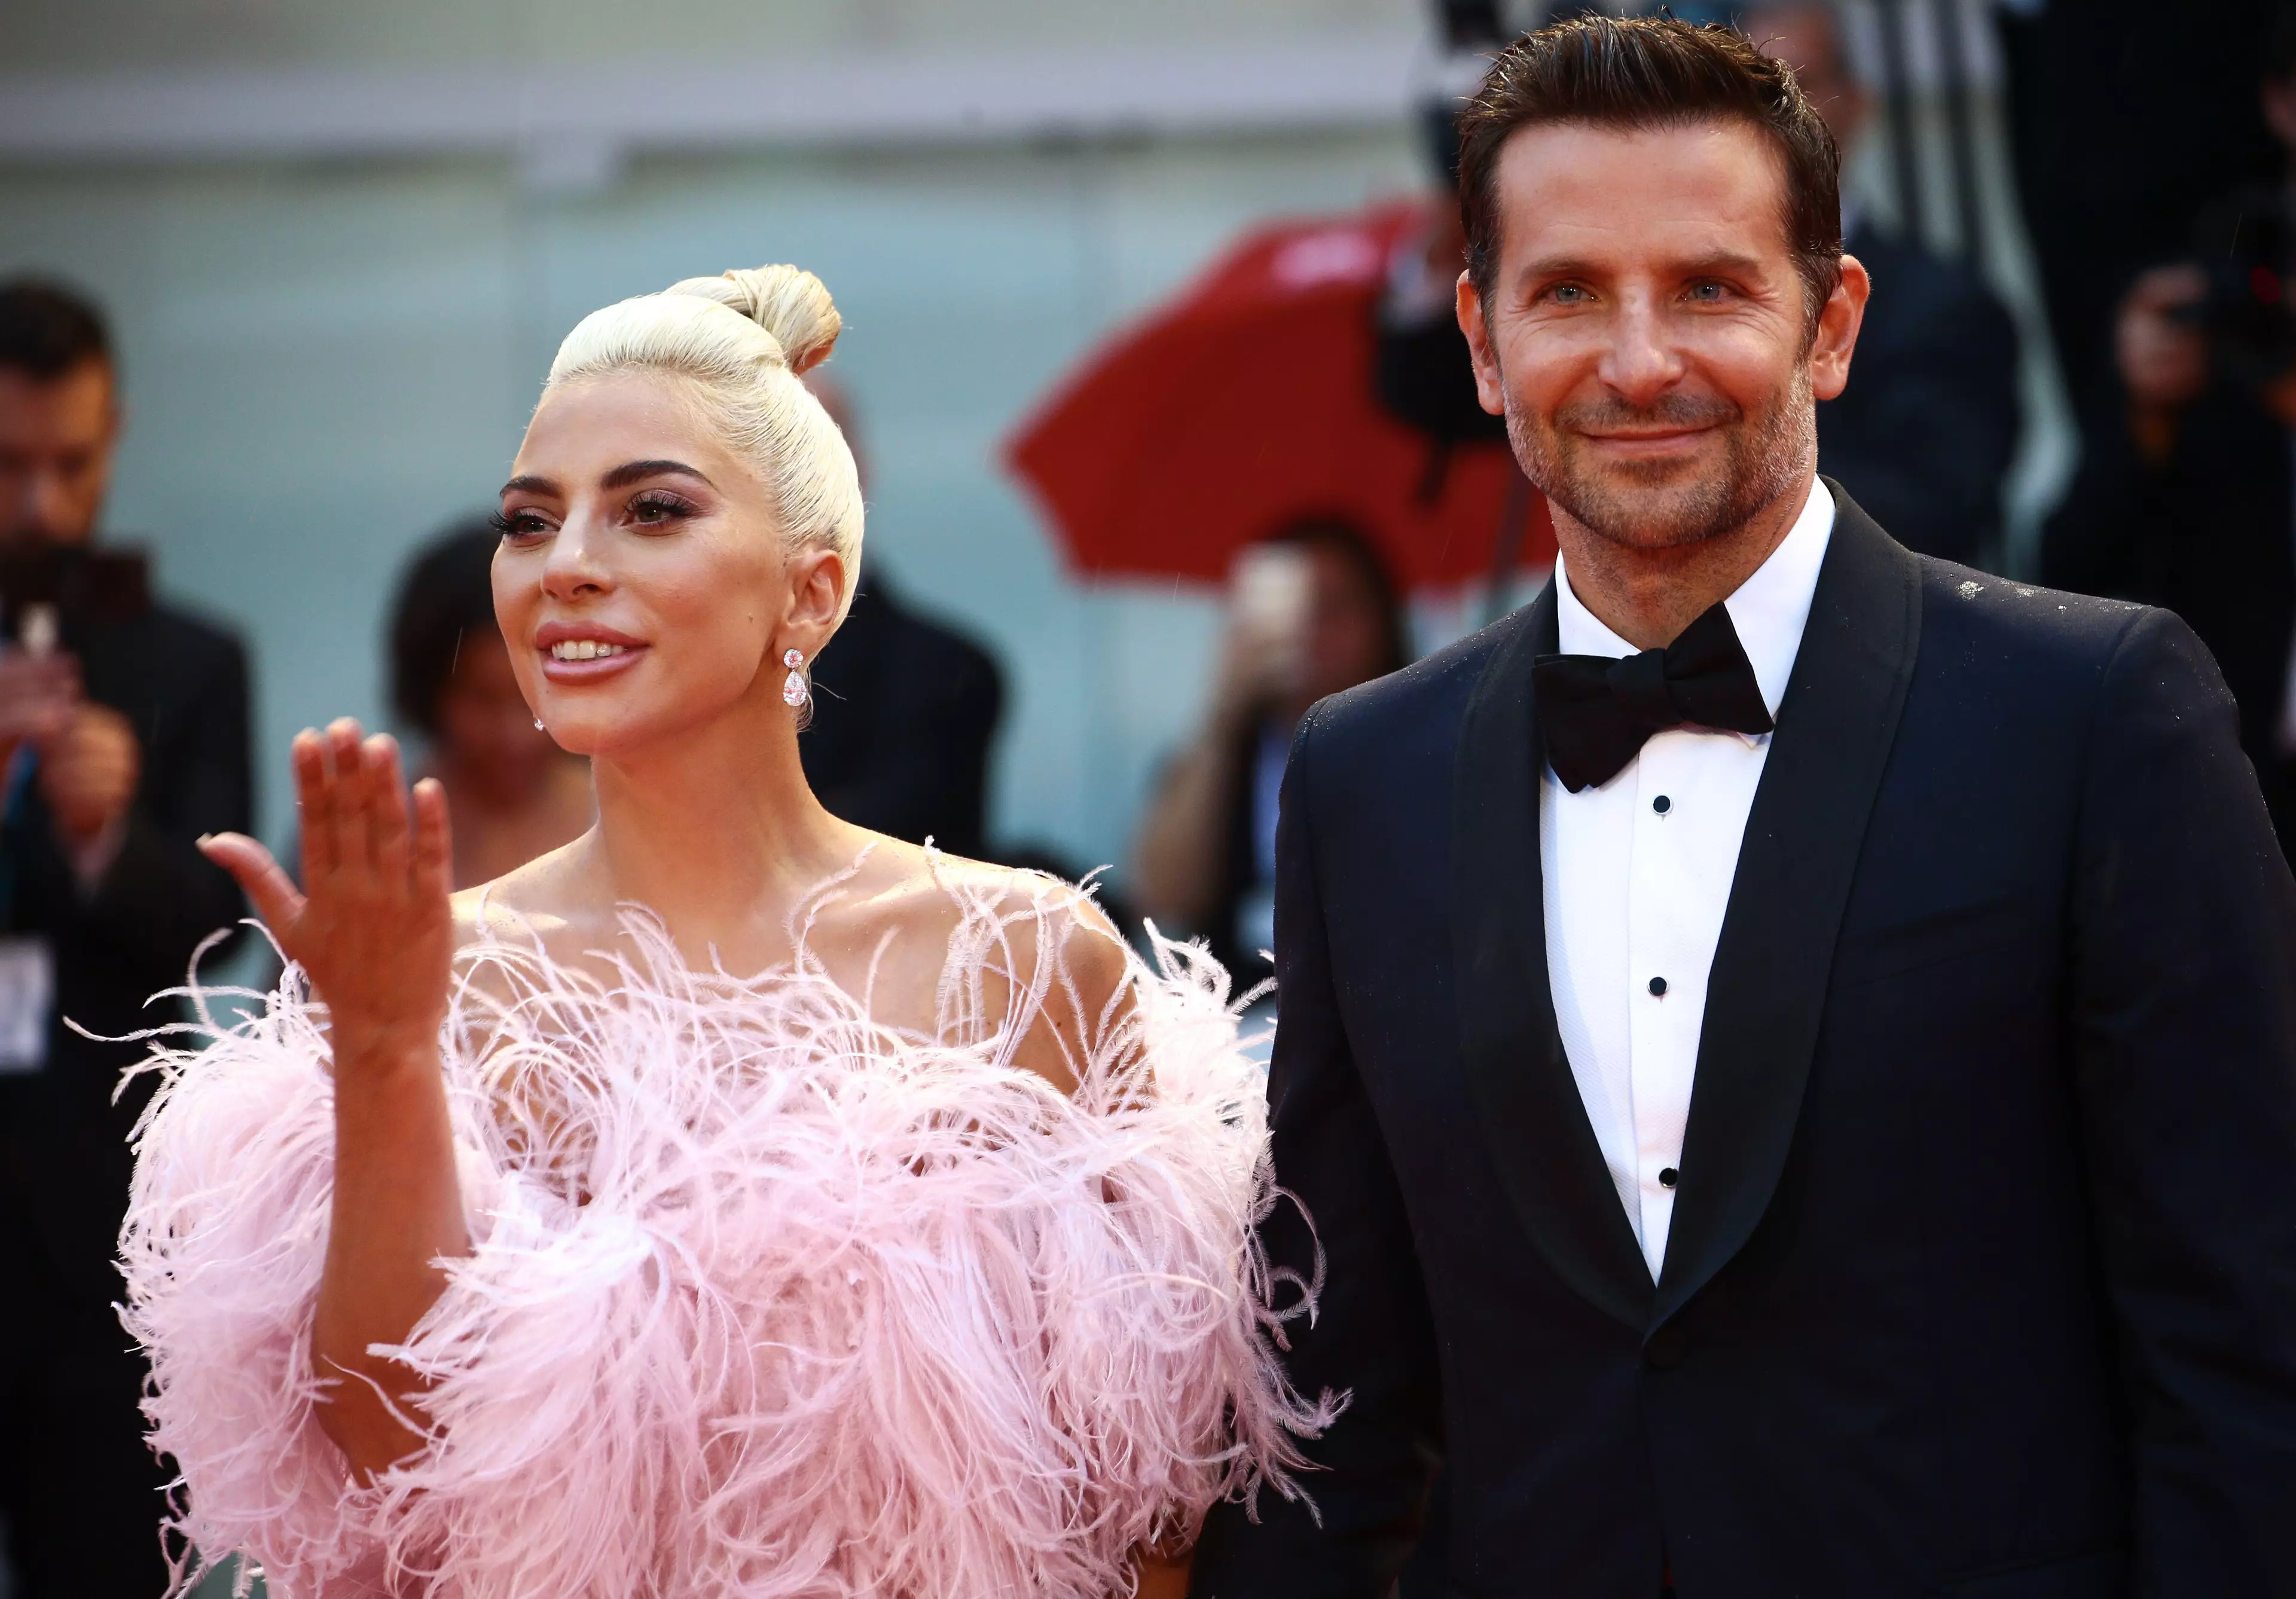 Lady Gaga and Bradley Cooper at the A Star Is Born screening during the Venice Film Festival.